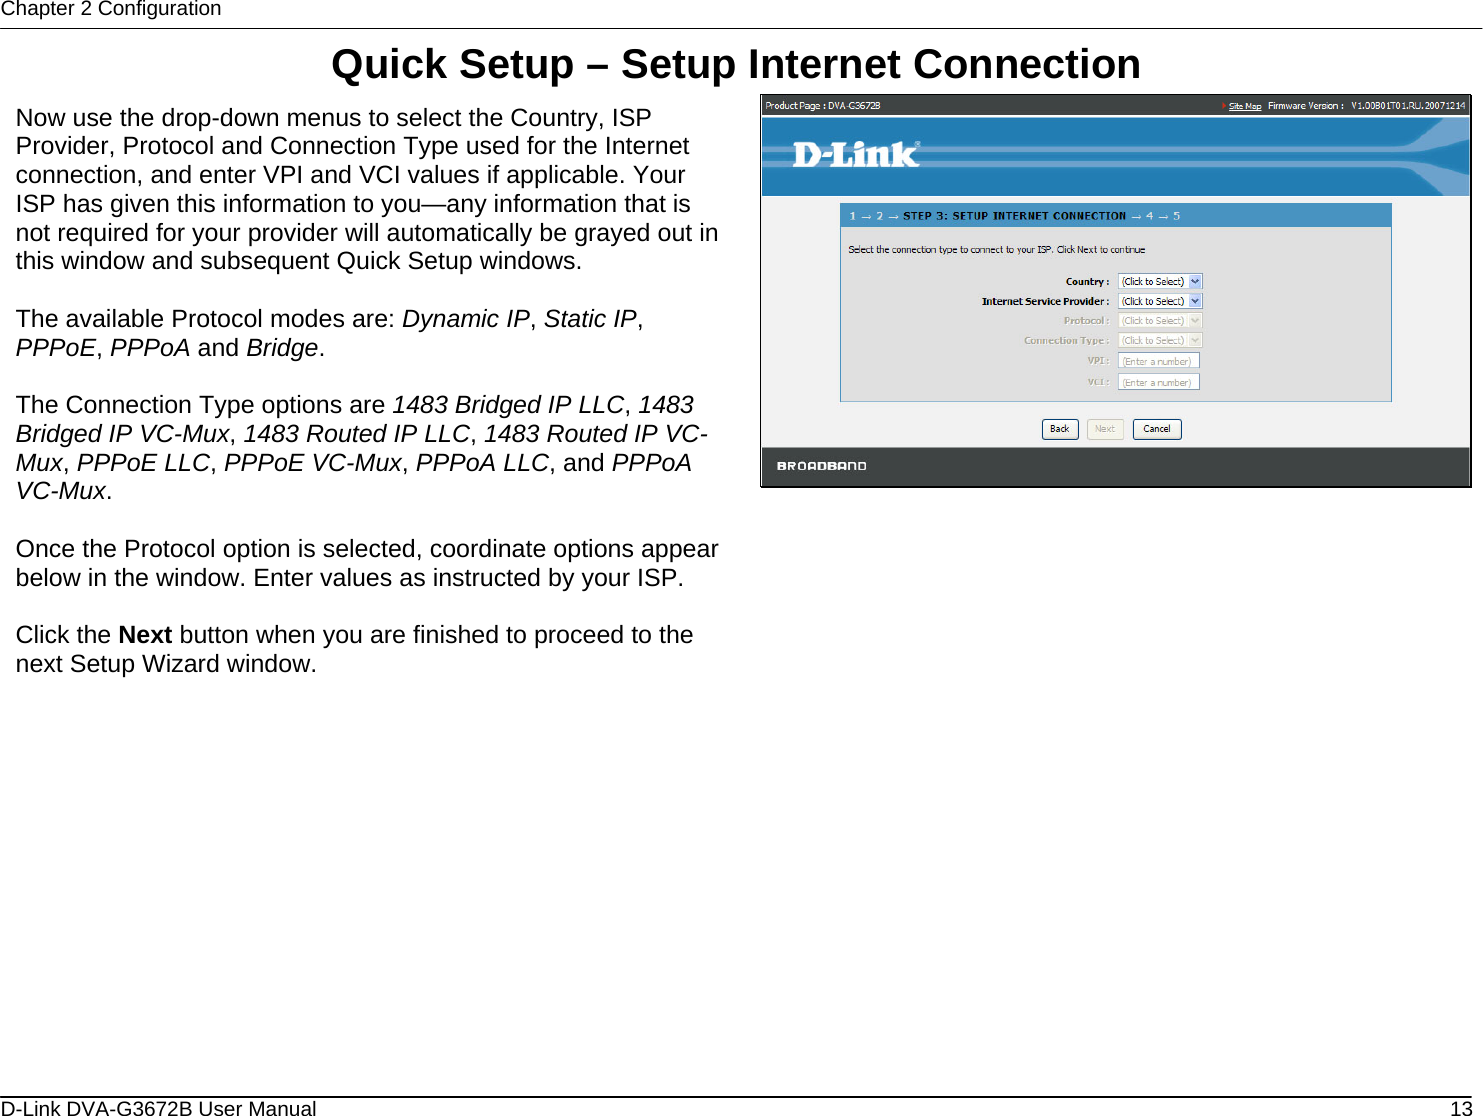 Chapter 2 Configuration Quick Setup – Setup Internet Connection  Now use the drop-down menus to select the Country, ISP Provider, Protocol and Connection Type used for the Internet connection, and enter VPI and VCI values if applicable. Your ISP has given this information to you—any information that is not required for your provider will automatically be grayed out in this window and subsequent Quick Setup windows.   The available Protocol modes are: Dynamic IP, Static IP, PPPoE, PPPoA and Bridge.  The Connection Type options are 1483 Bridged IP LLC, 1483 Bridged IP VC-Mux, 1483 Routed IP LLC, 1483 Routed IP VC-Mux, PPPoE LLC, PPPoE VC-Mux, PPPoA LLC, and PPPoA VC-Mux.  Once the Protocol option is selected, coordinate options appear below in the window. Enter values as instructed by your ISP.  Click the Next button when you are finished to proceed to the next Setup Wizard window.                      D-Link DVA-G3672B User Manual  13